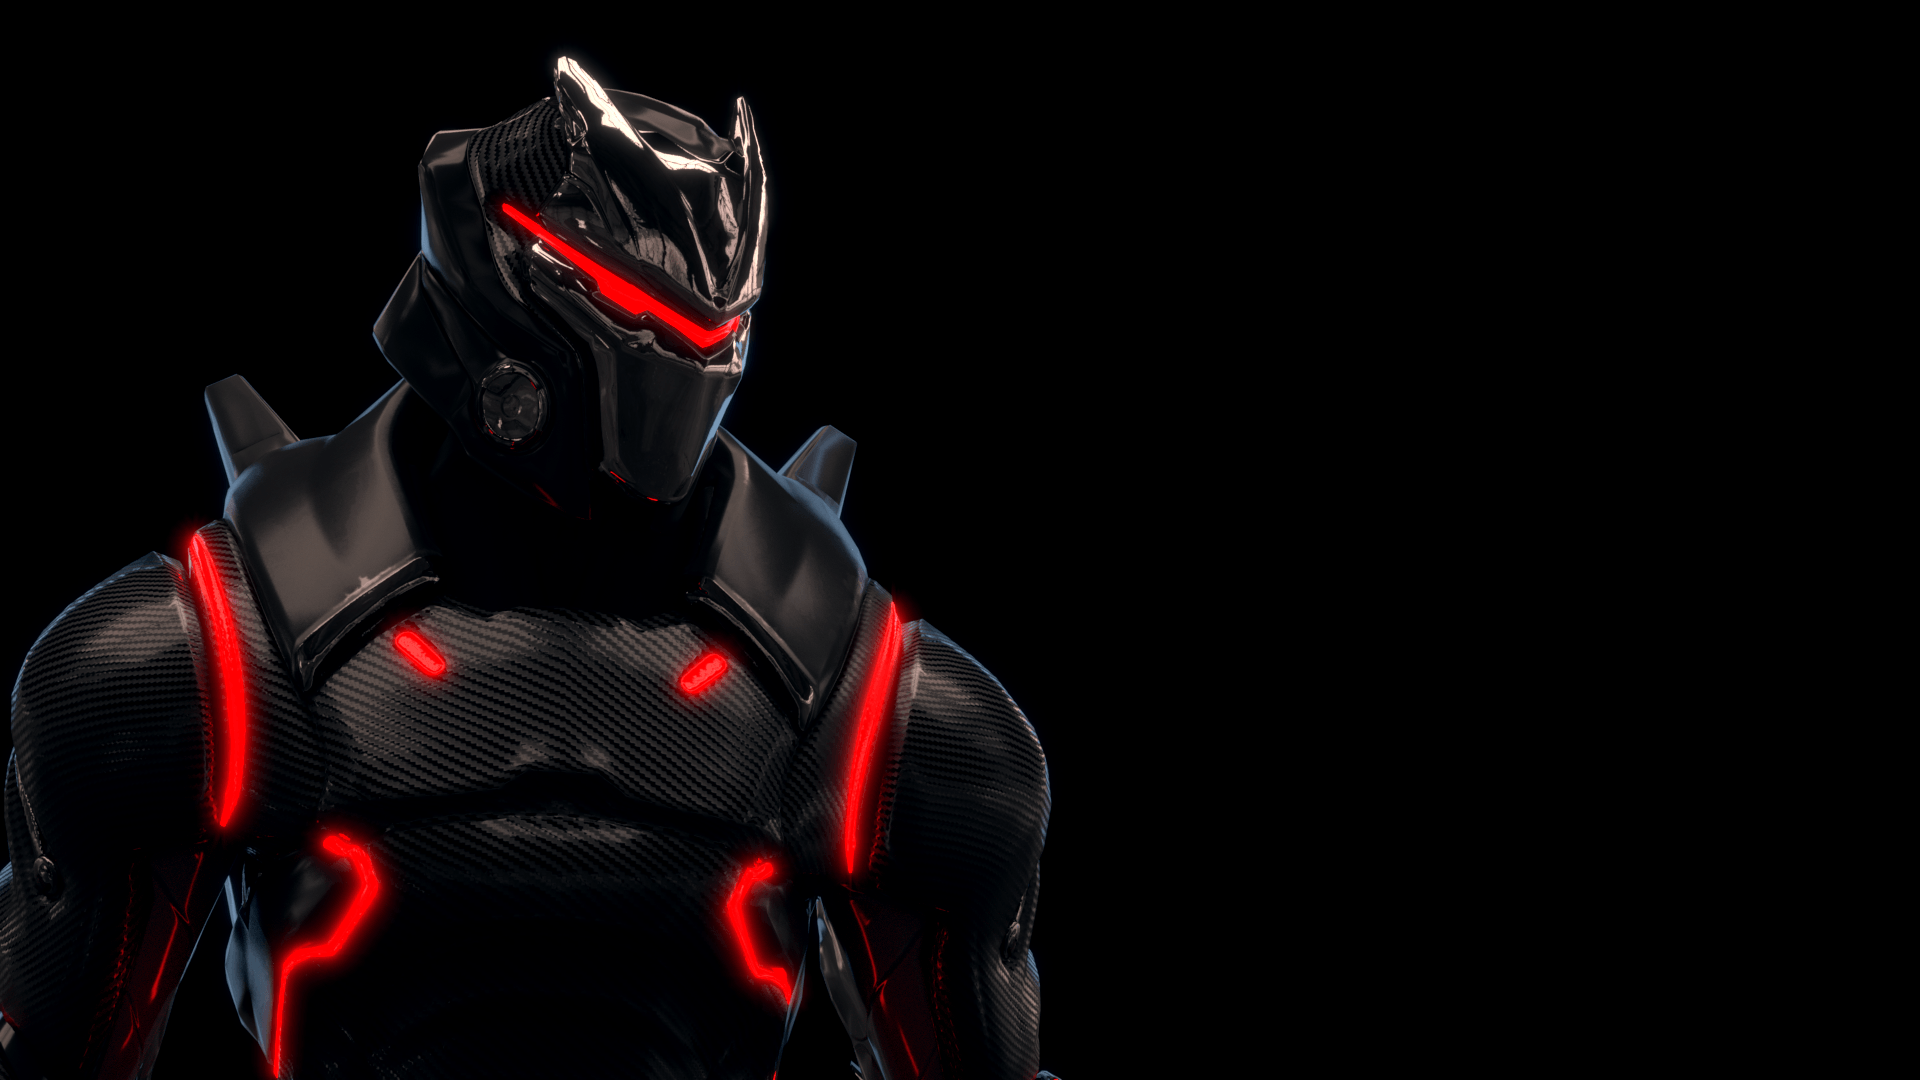 Made a wallpaper with the Omega!